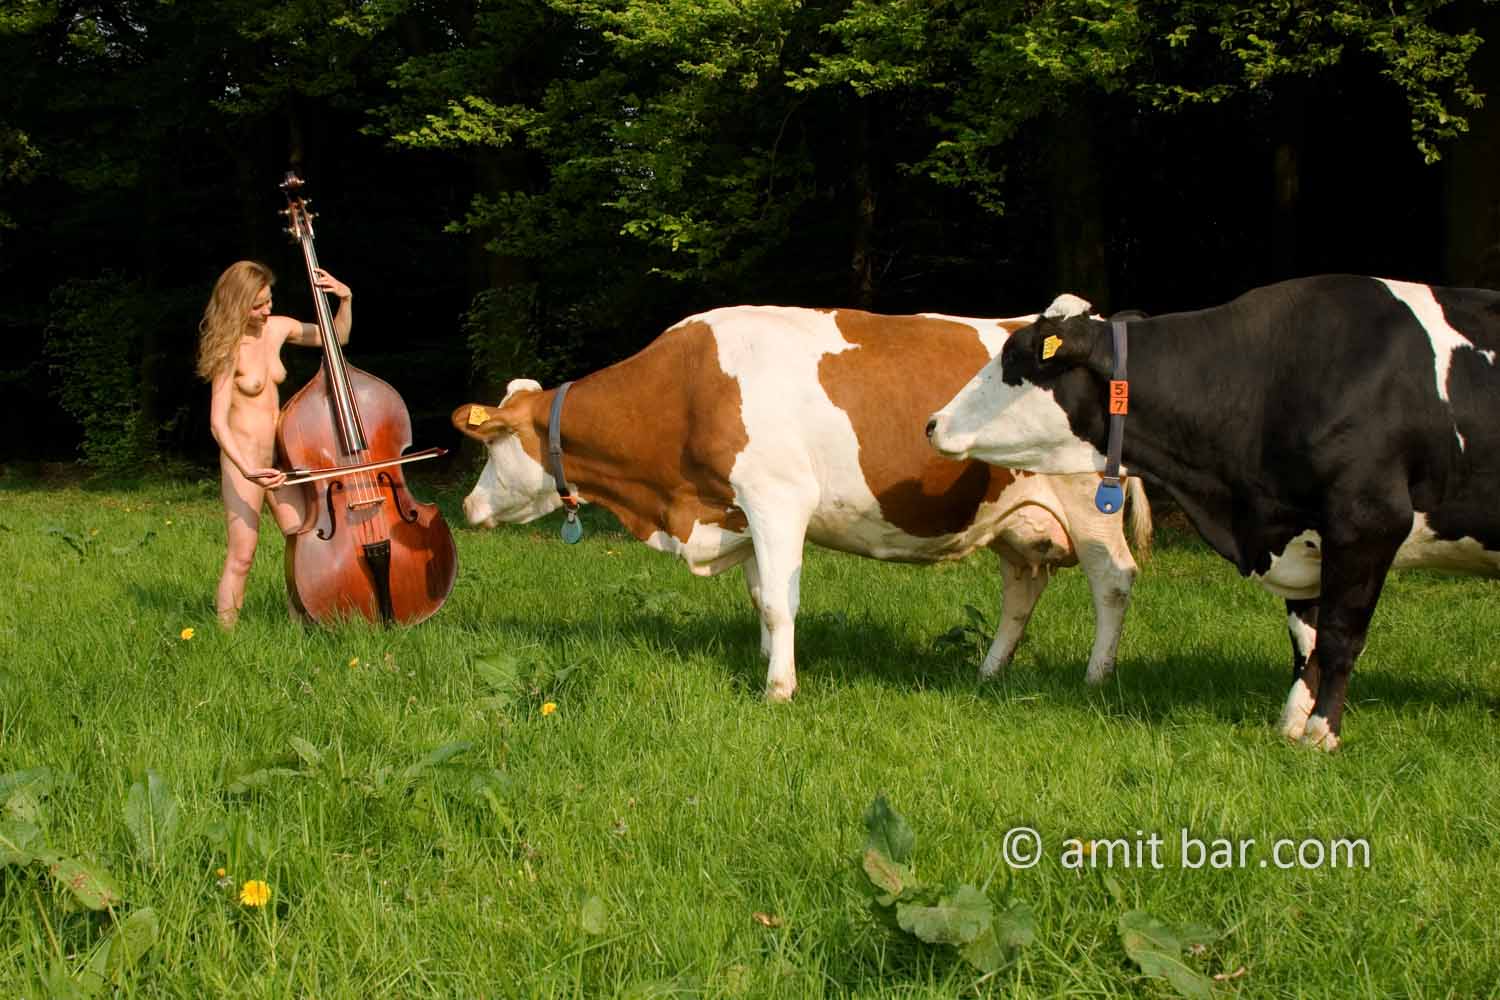 Concerto for contrabass and two cows: Nude model is playing contrabass for the curious cows